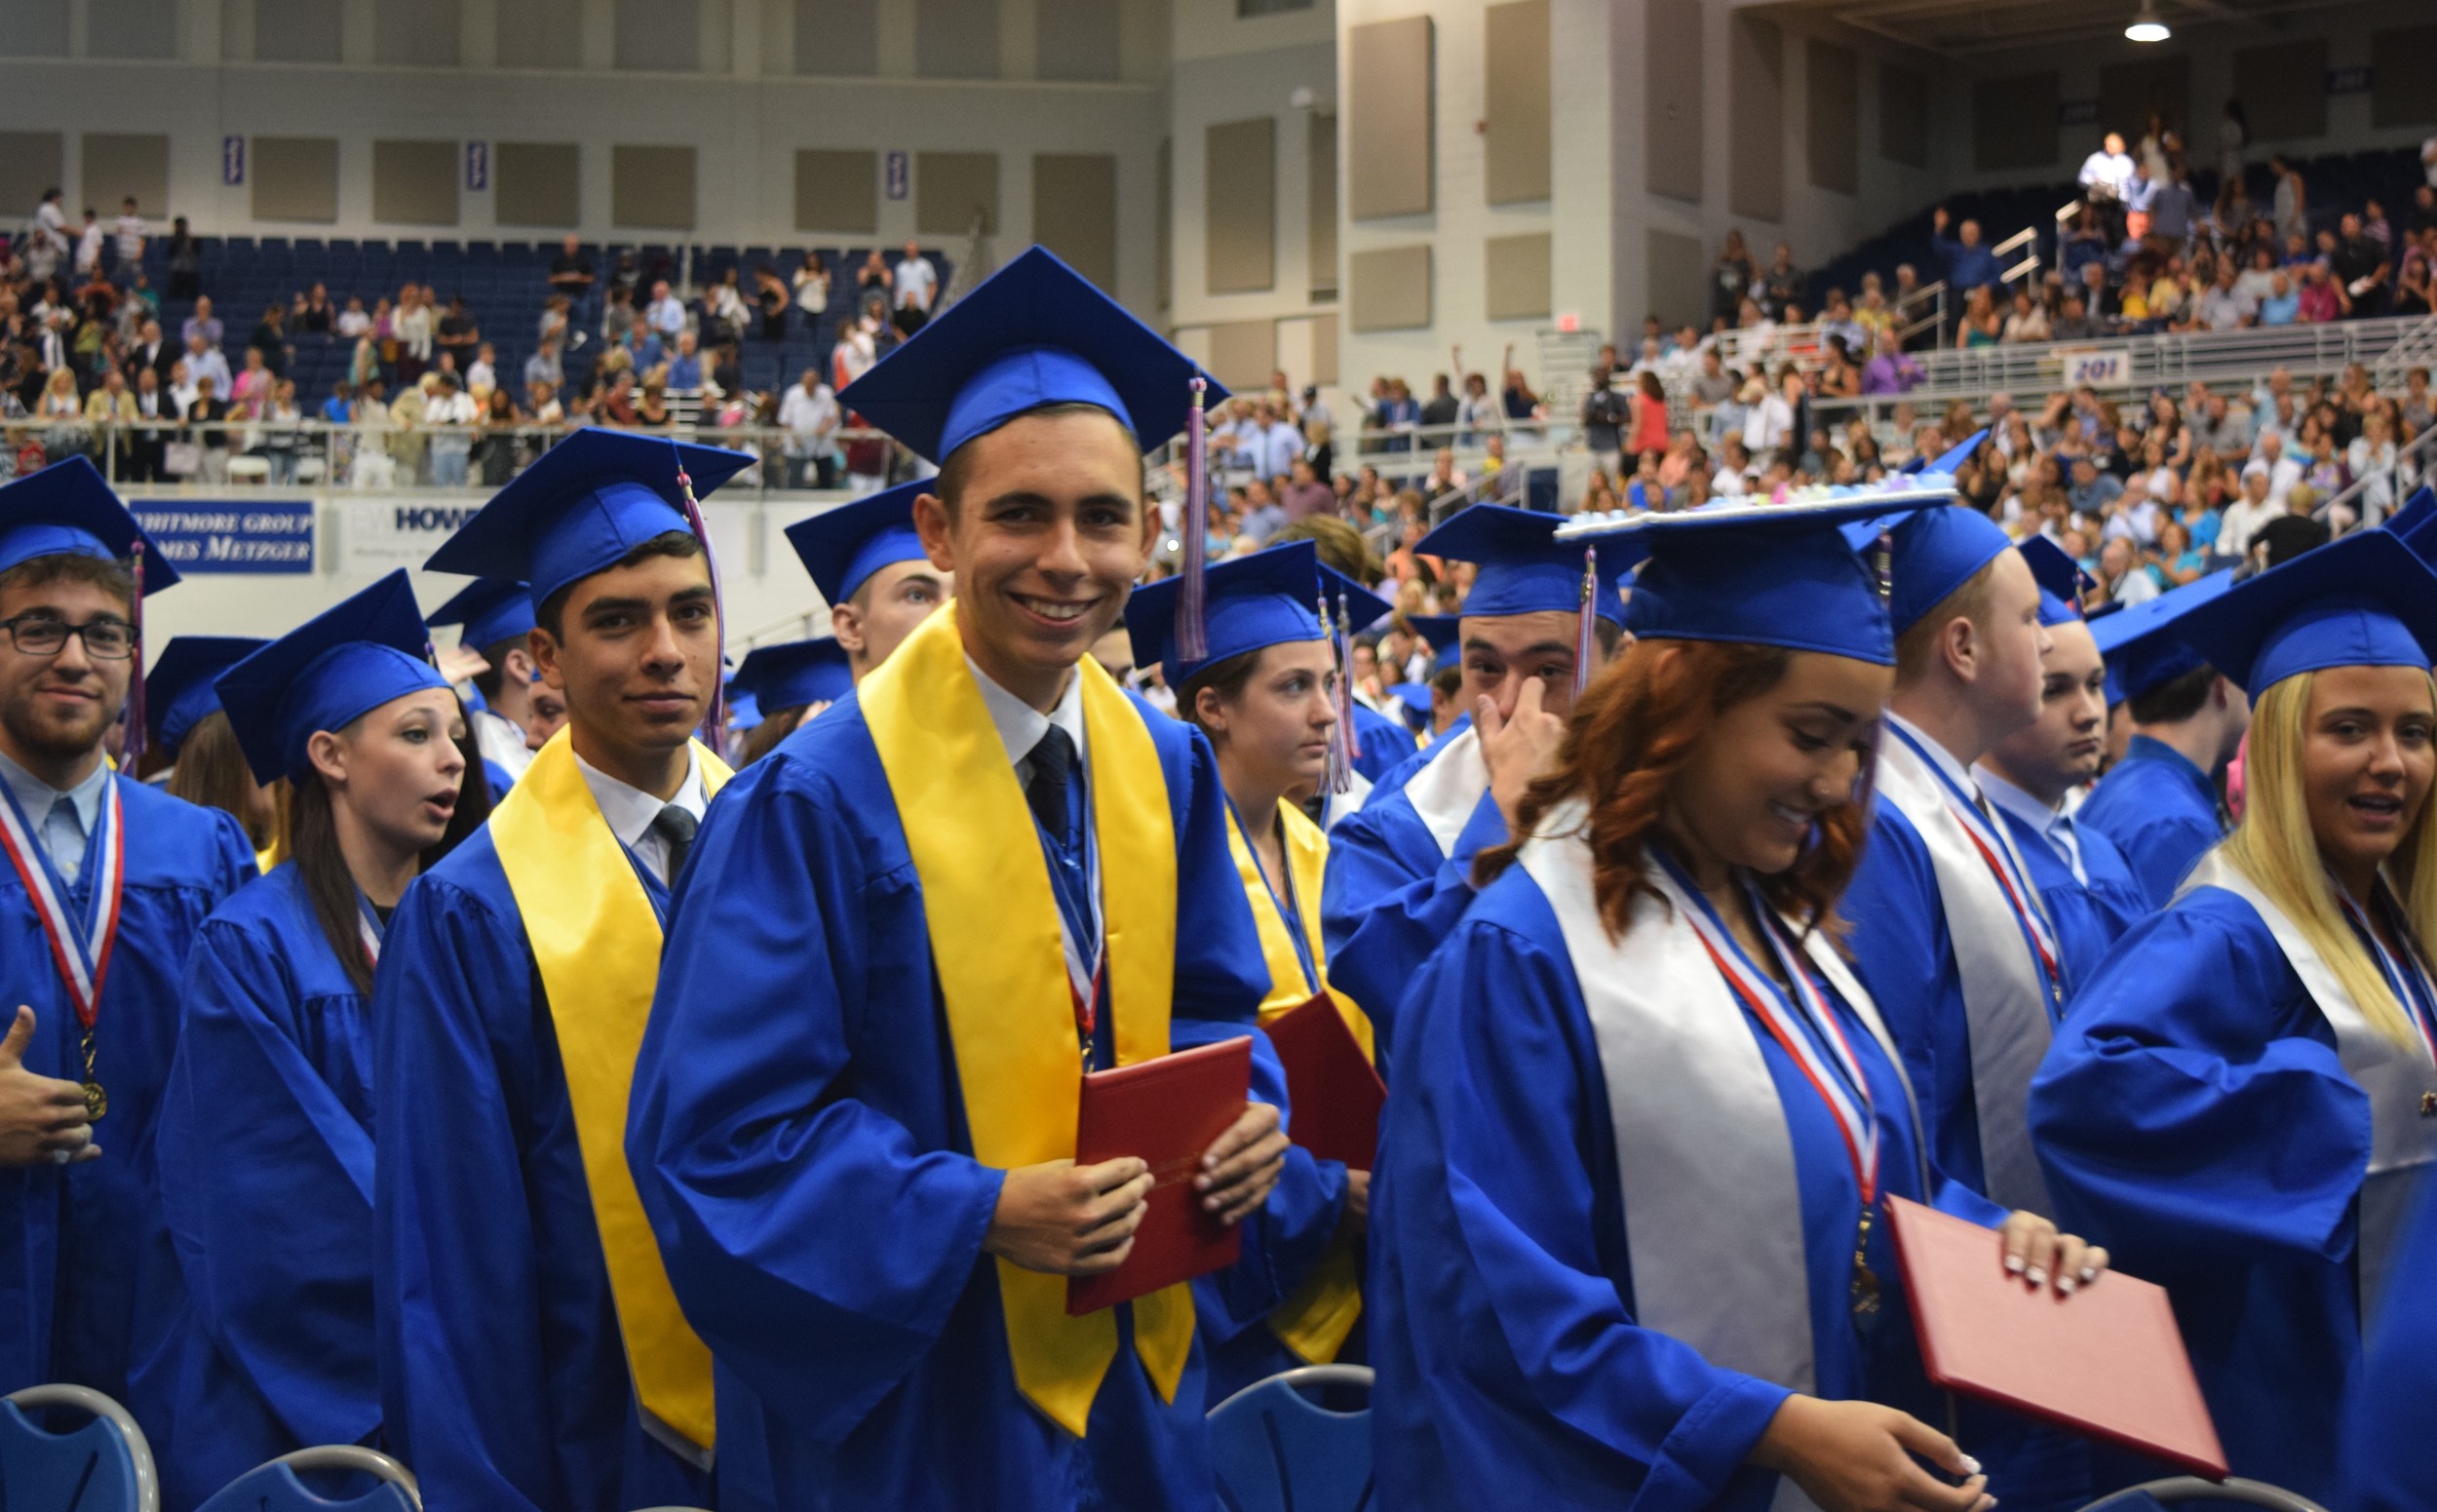 There was much excitement among the 329 graduates after their received their diplomas last Saturday morning.